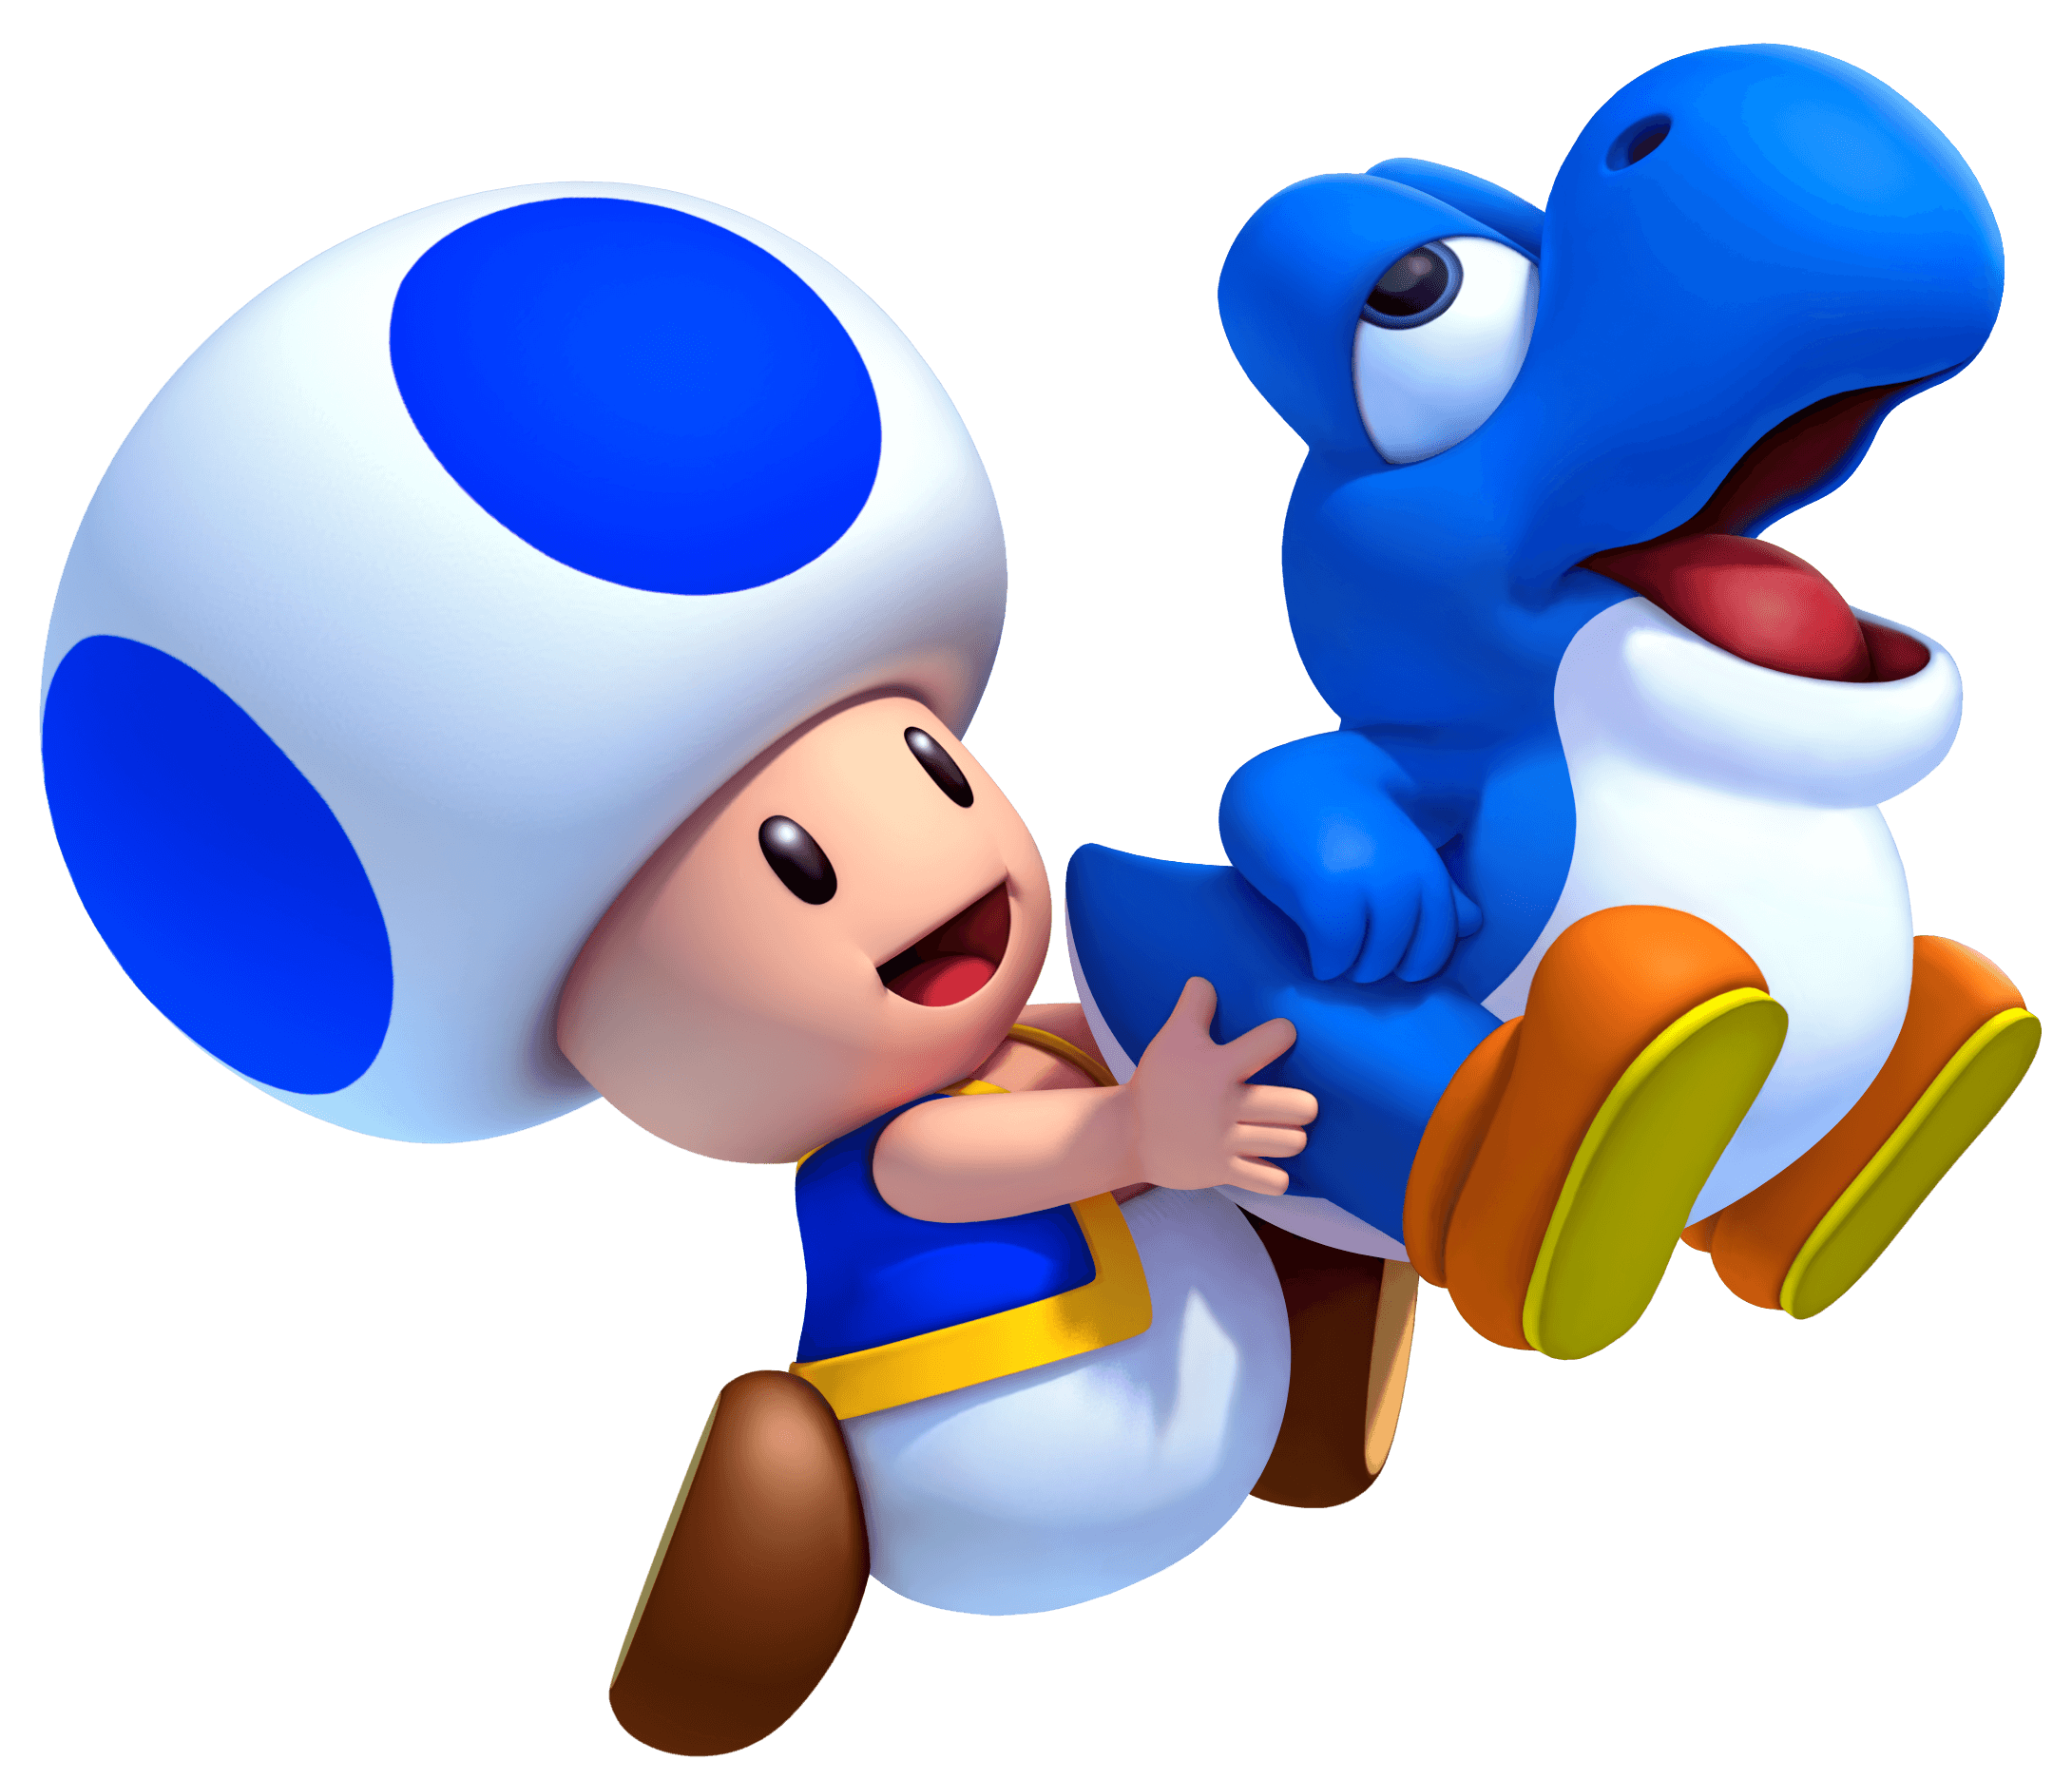 Vivendo Damusica: Blue Toad holding a blue Baby Yoshi in New Super